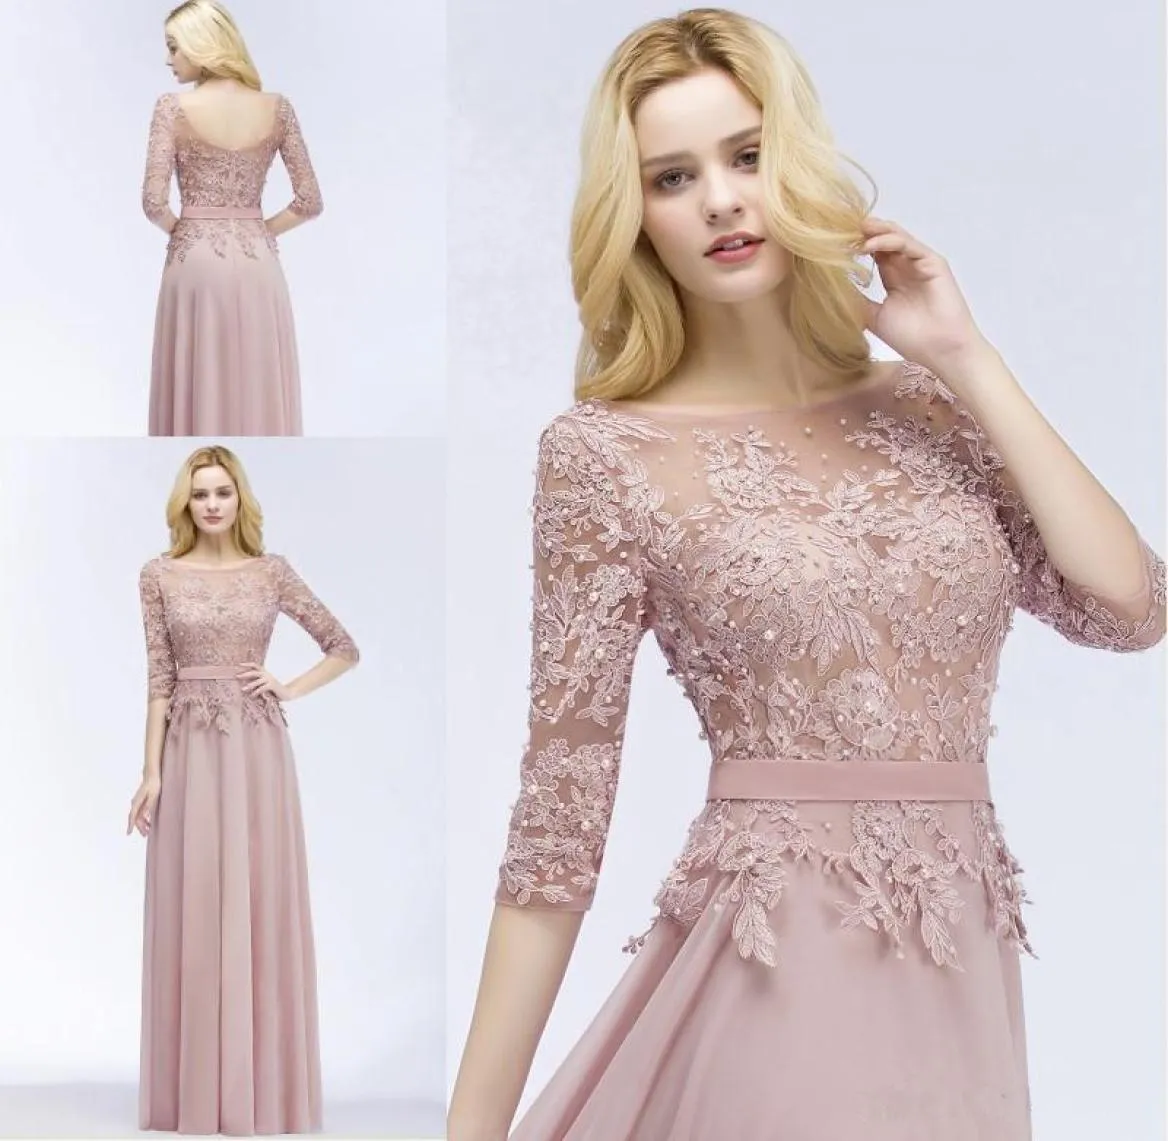 2019 New Designer Blush Pink Long Prom Dresses with Half Sleeves Beaded Appliqued Cheap Party Gowns Evening Dress Robe De Soiree2087421